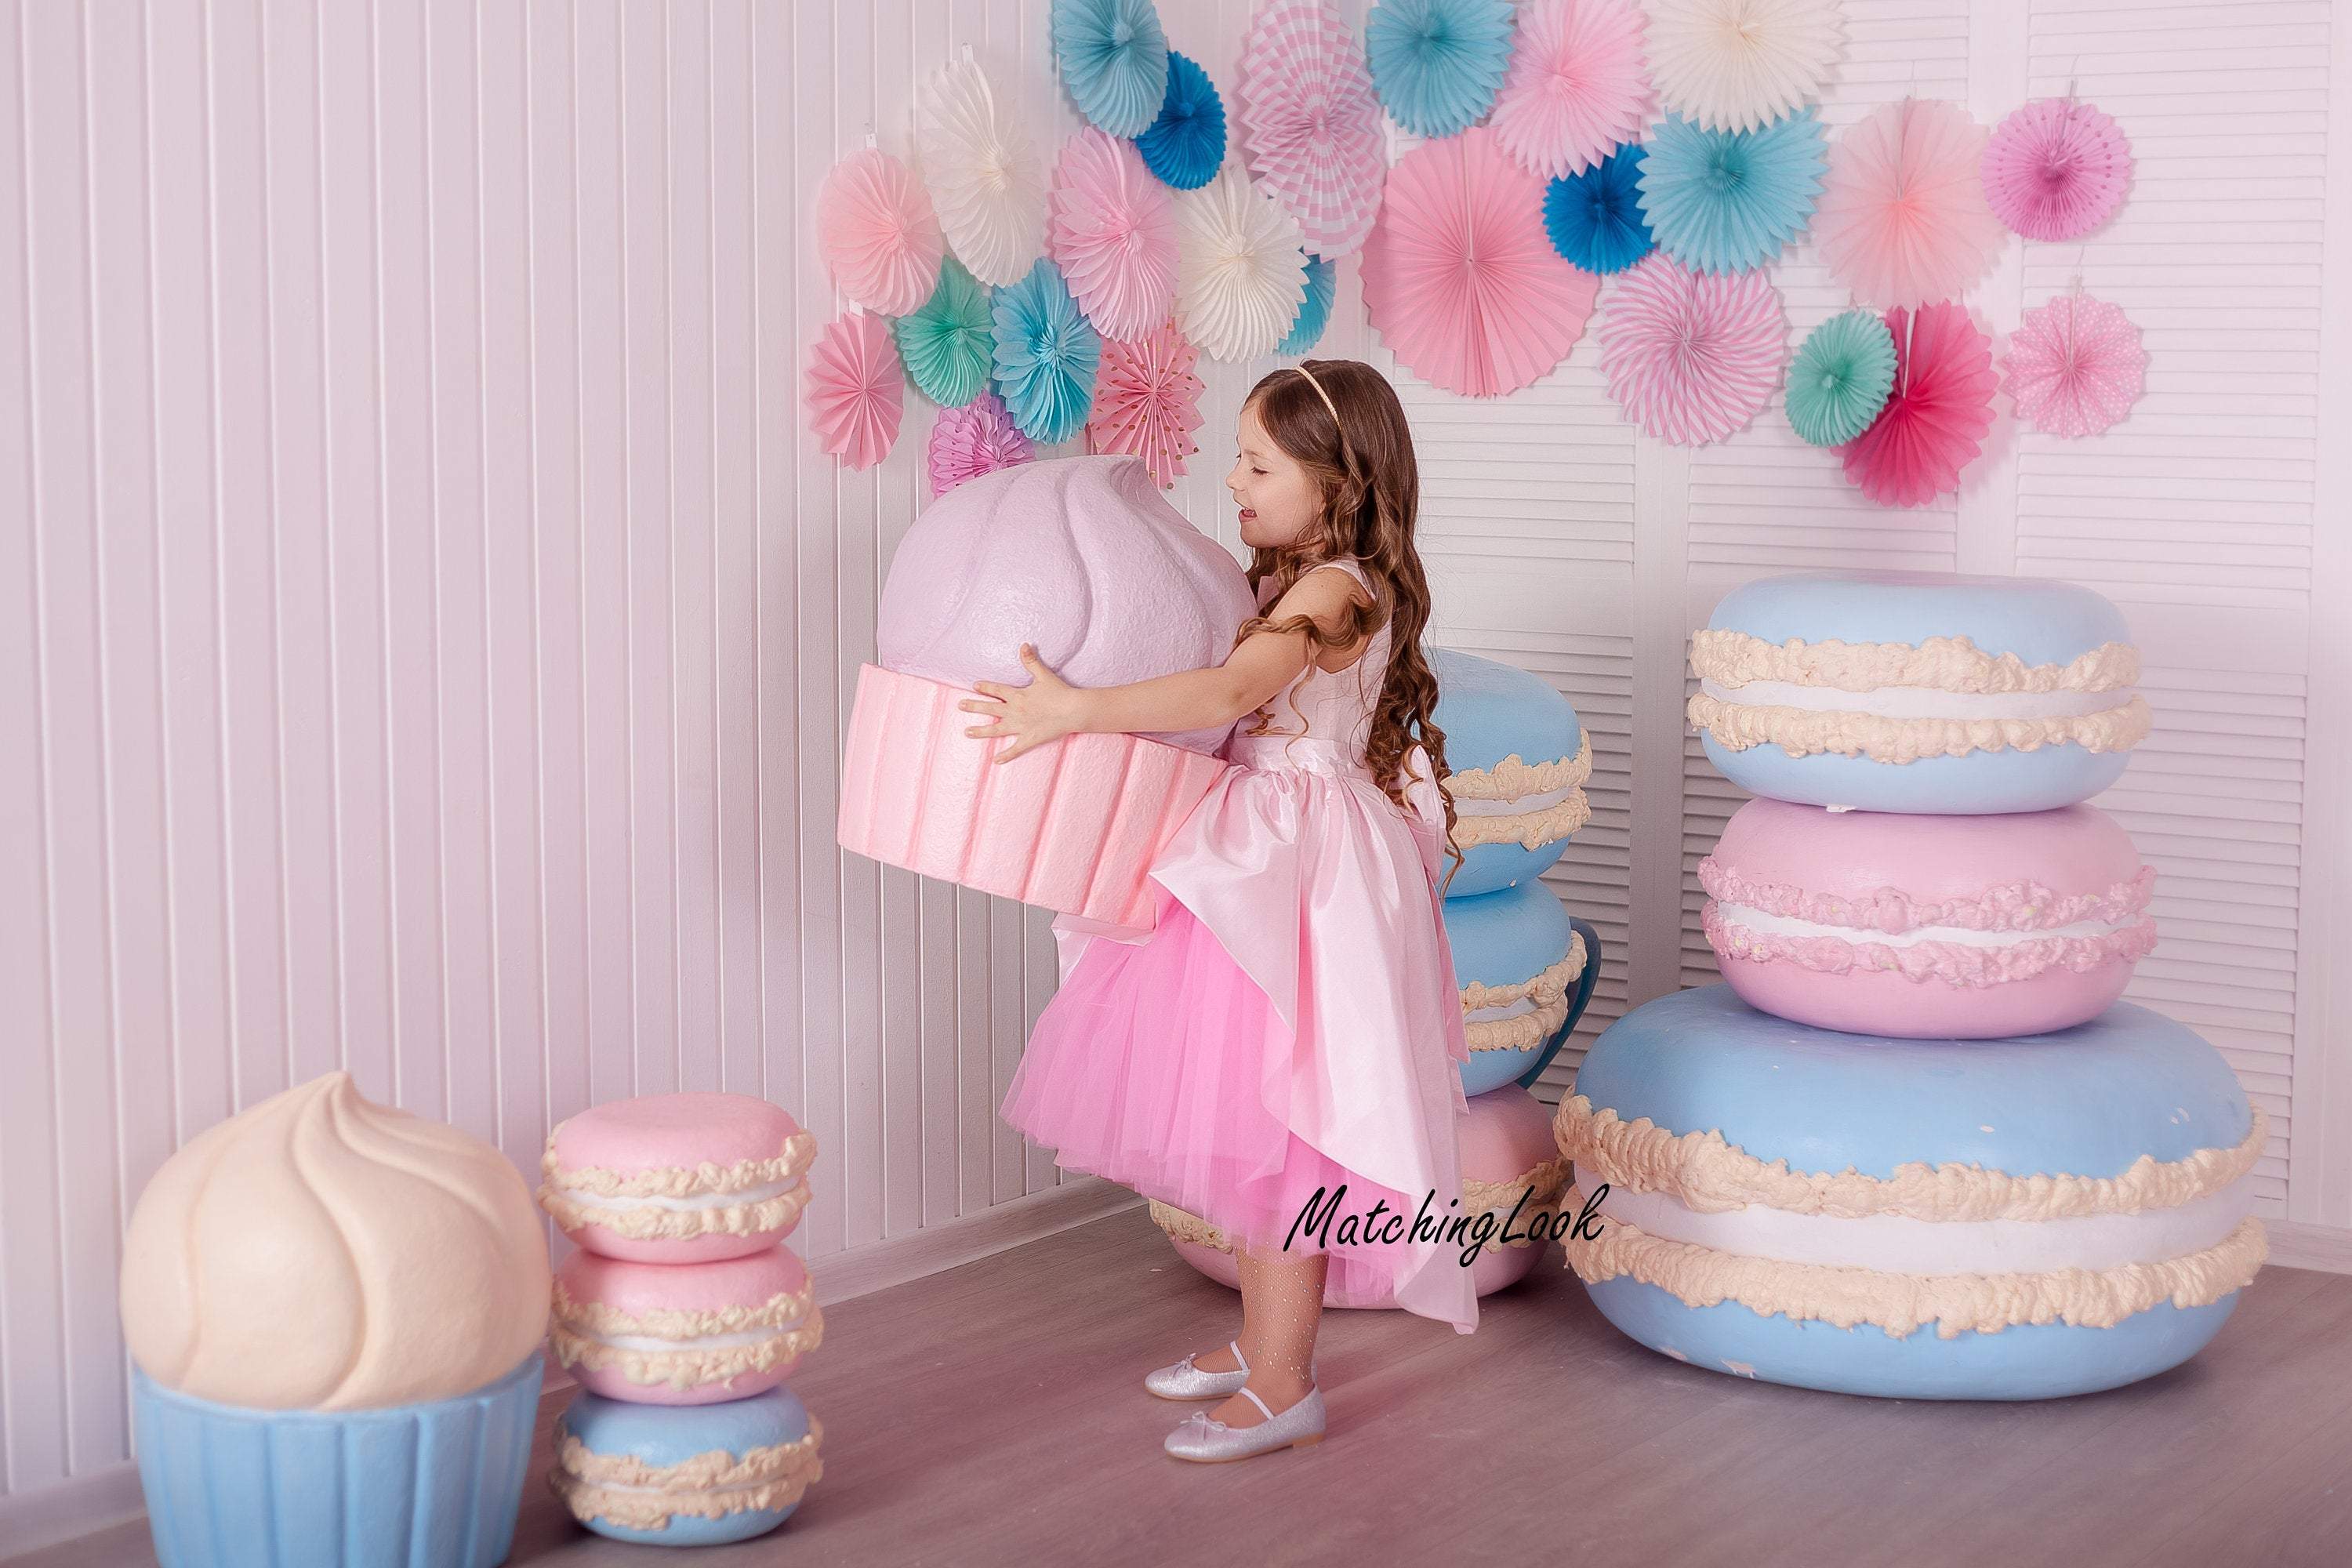 Matchinglook First Birthday Dress for Girl, Flower Girl Dress, Dress for Baby Girl, Pink Dress, Tulle Tutu Dress, Toddler Girl Gown, Party Dress for Girl 4T /